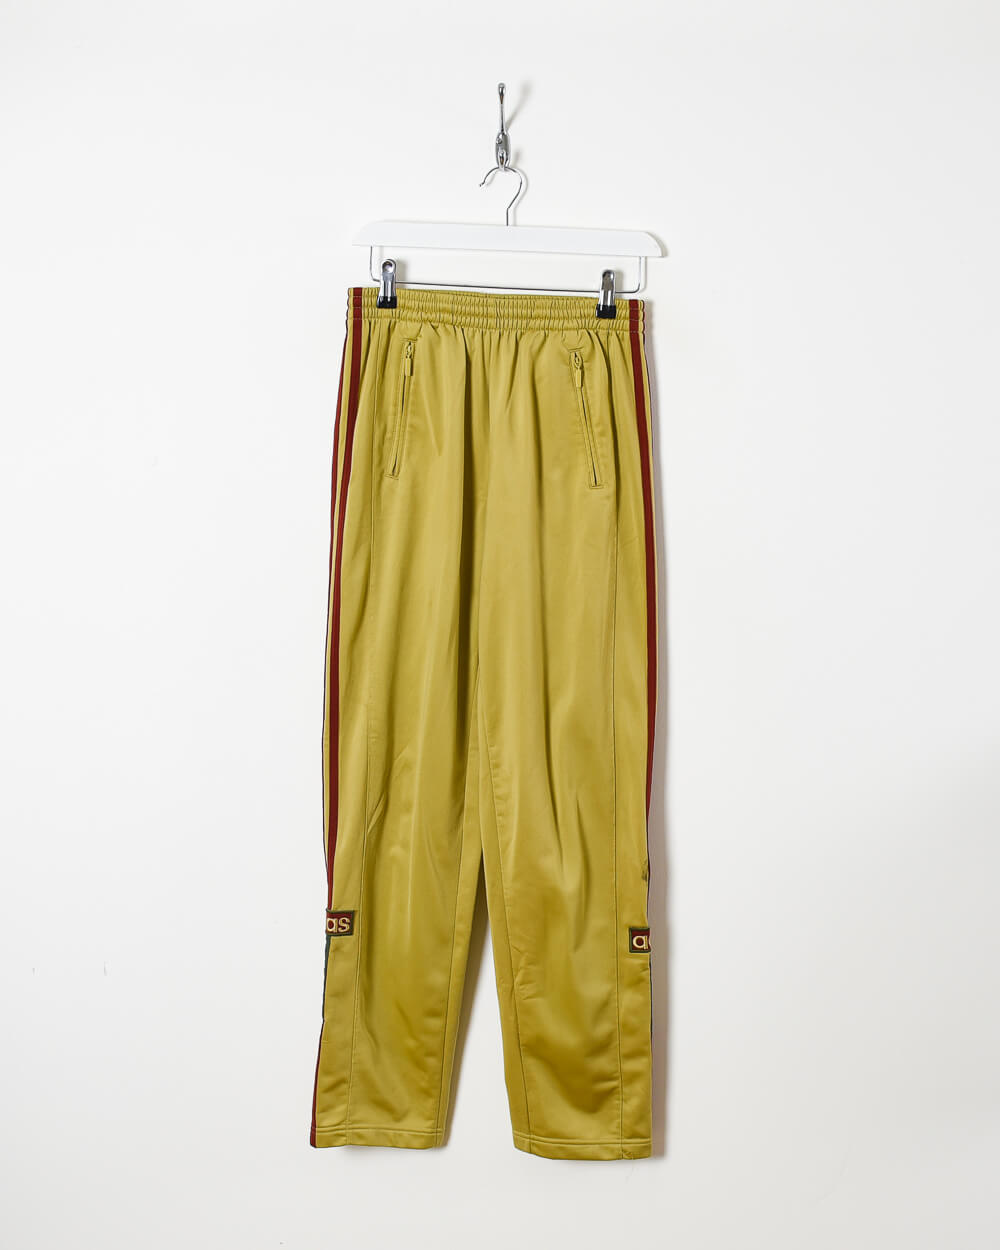 Yellow Adidas The Brand With Three Stripes Tracksuit Bottoms - W26 L29